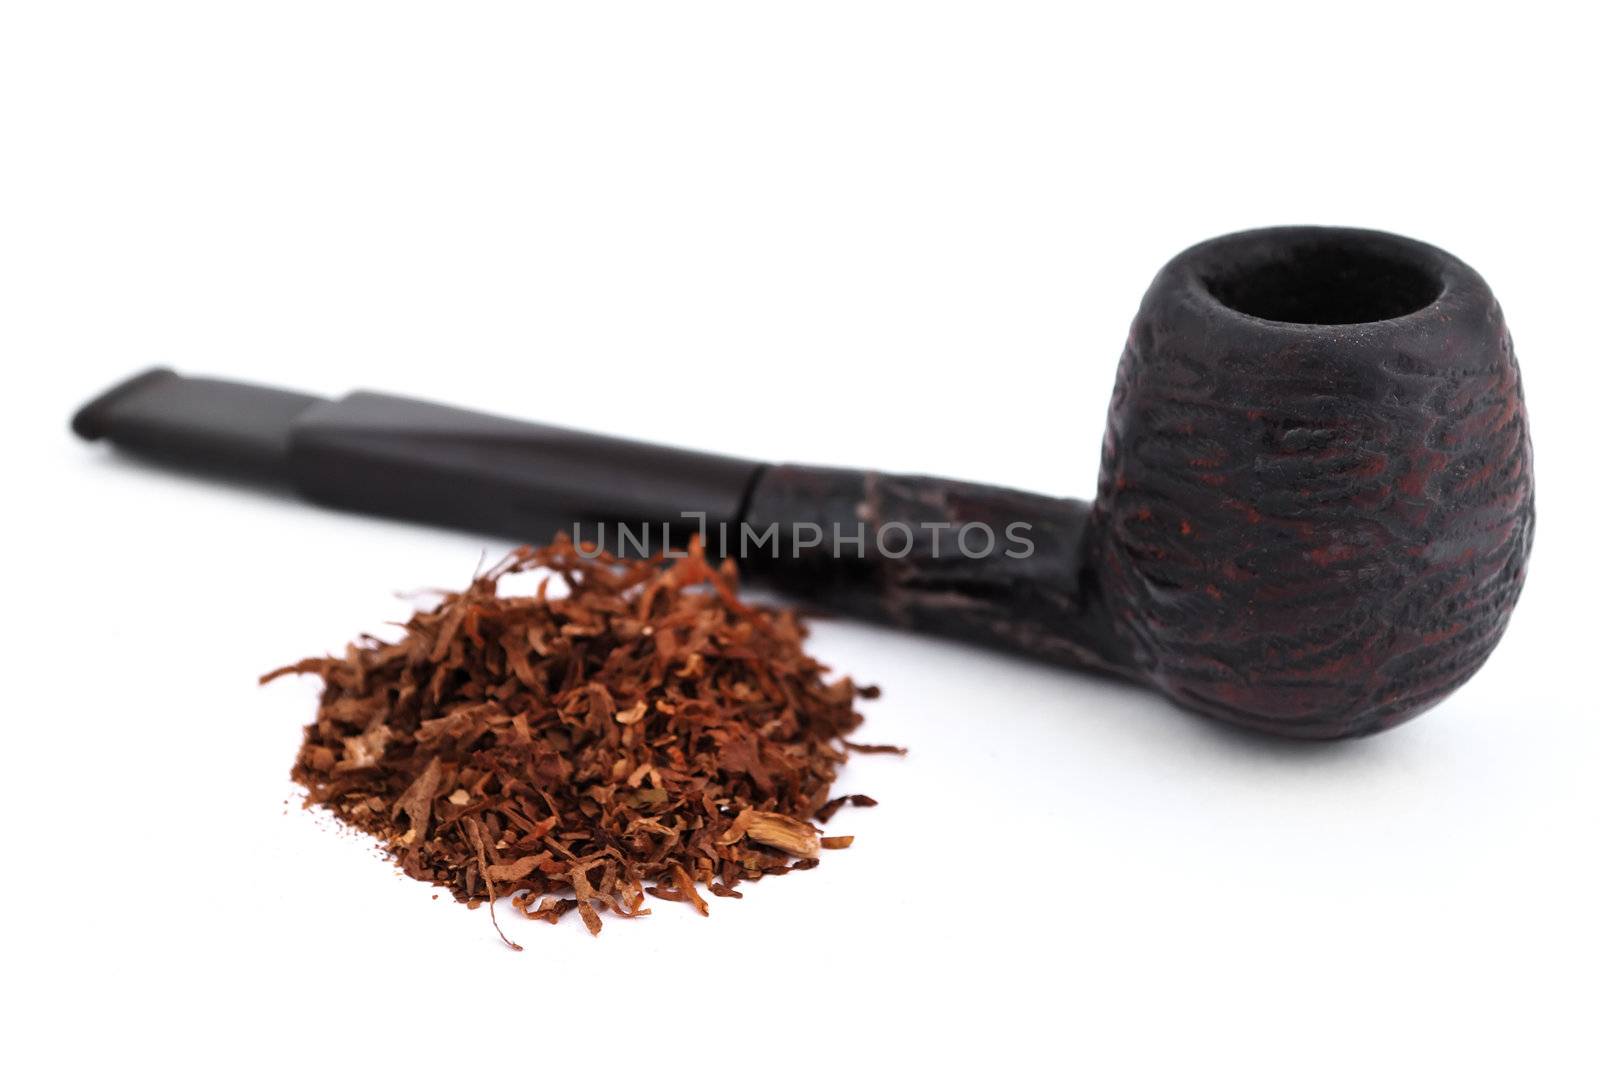 pipe tobacco by vetkit